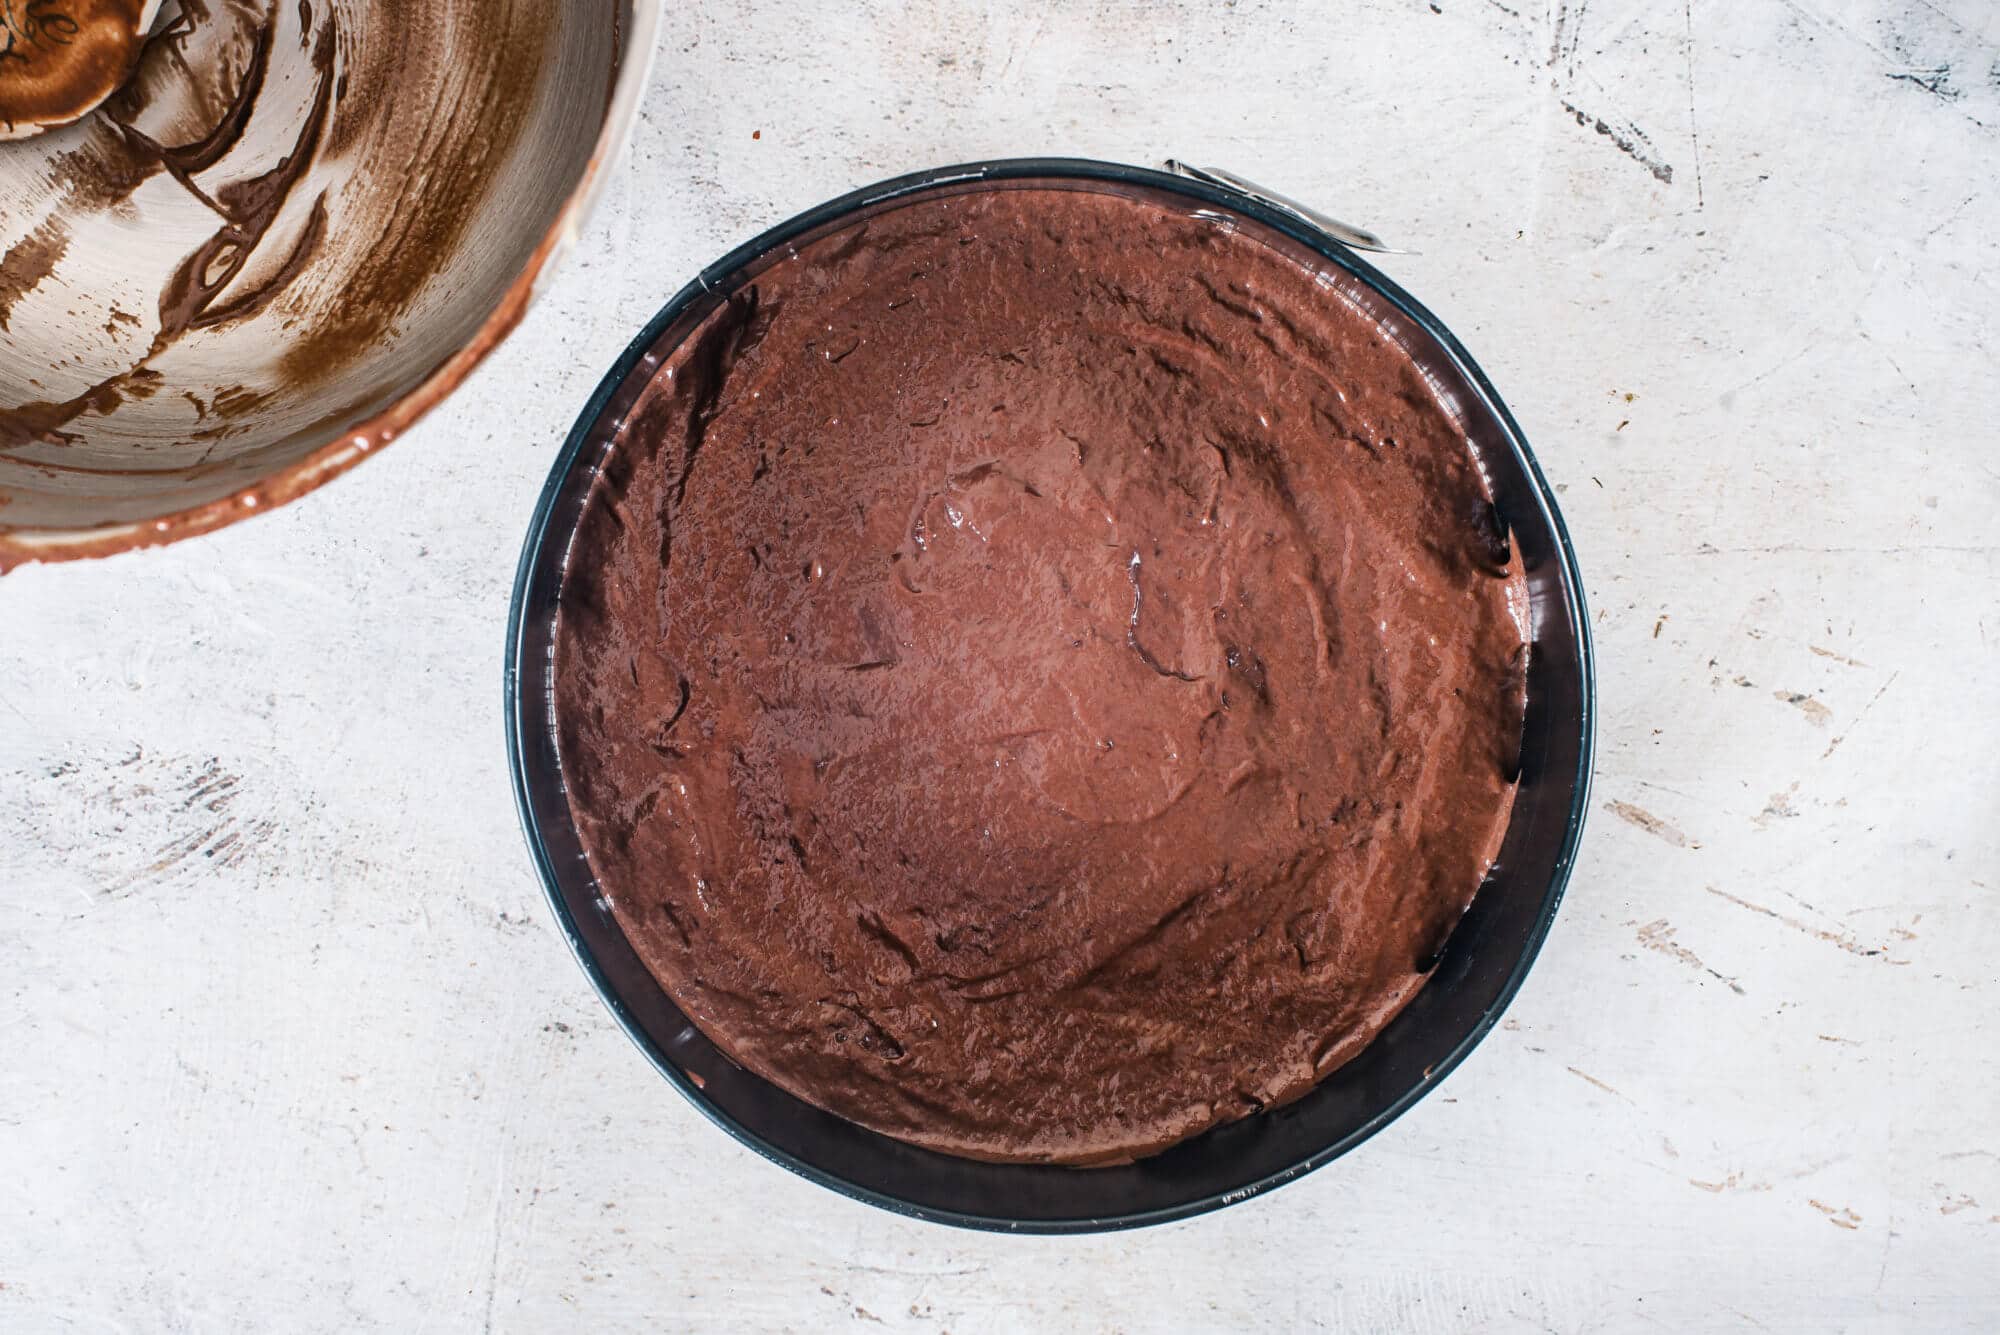 chocolate-cake-batter-in-a-springform-pan-with-an-empty-silver-bowl-on-the-side